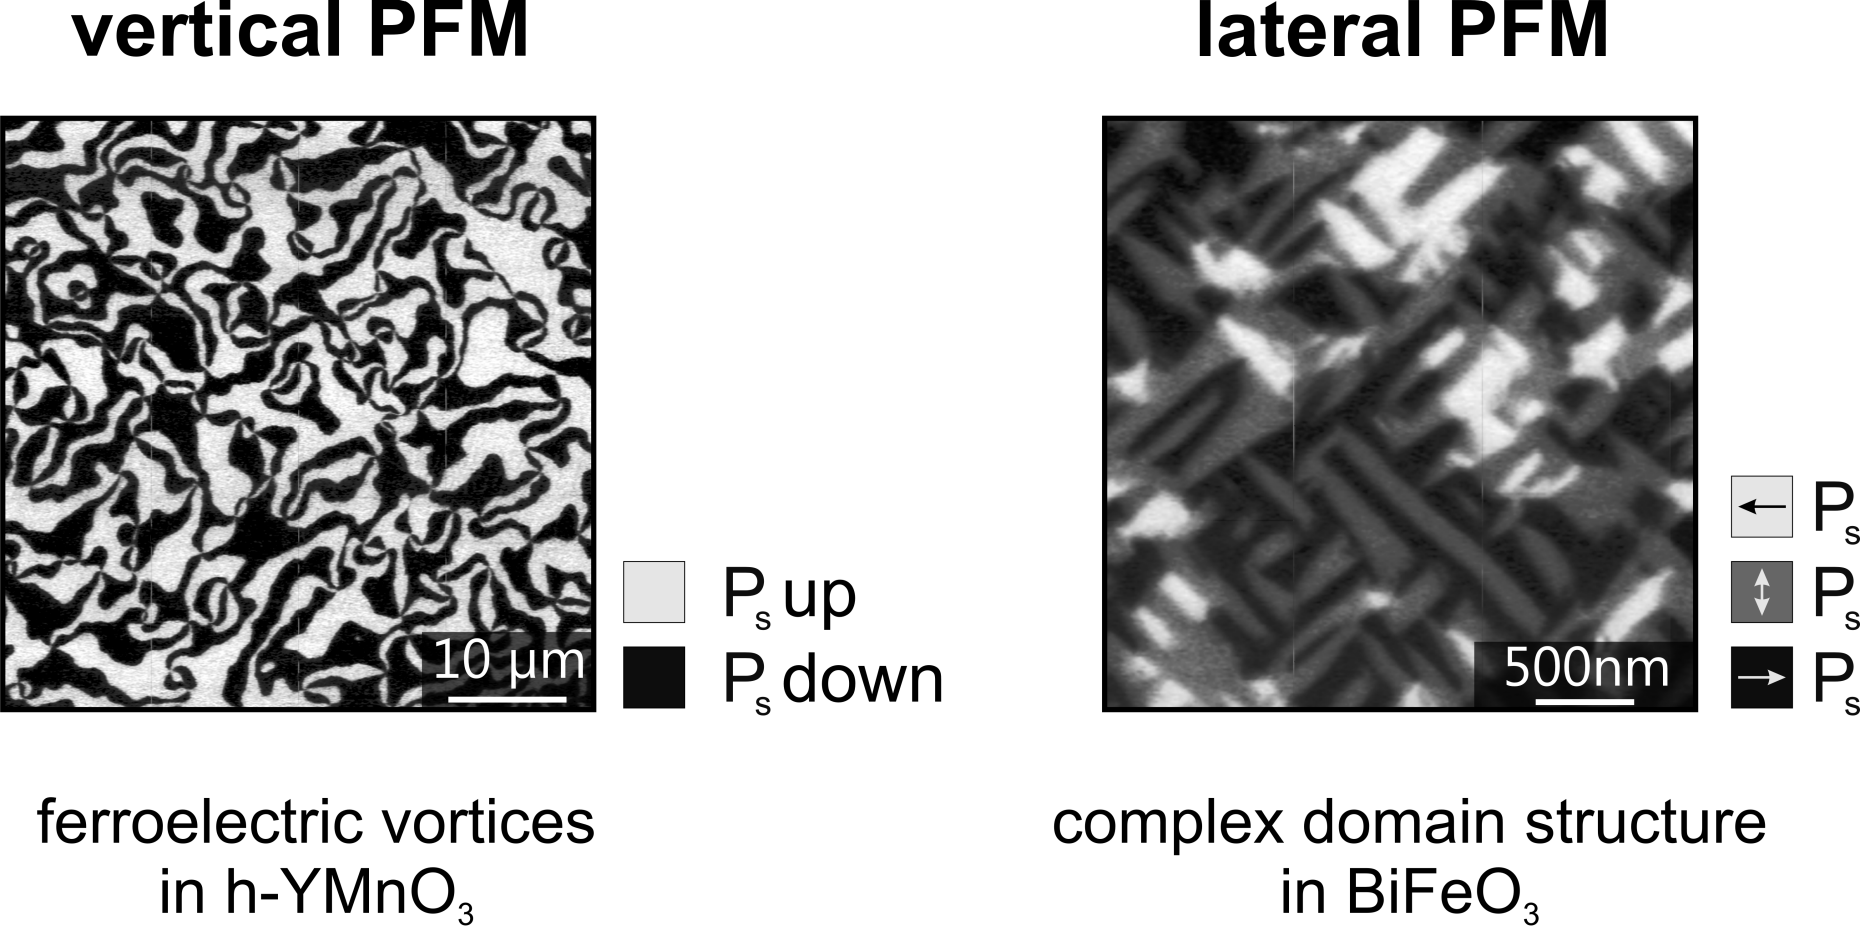 Enlarged view: By vertical and lateral PFM domain orientations in all three dimensions can be distinguished